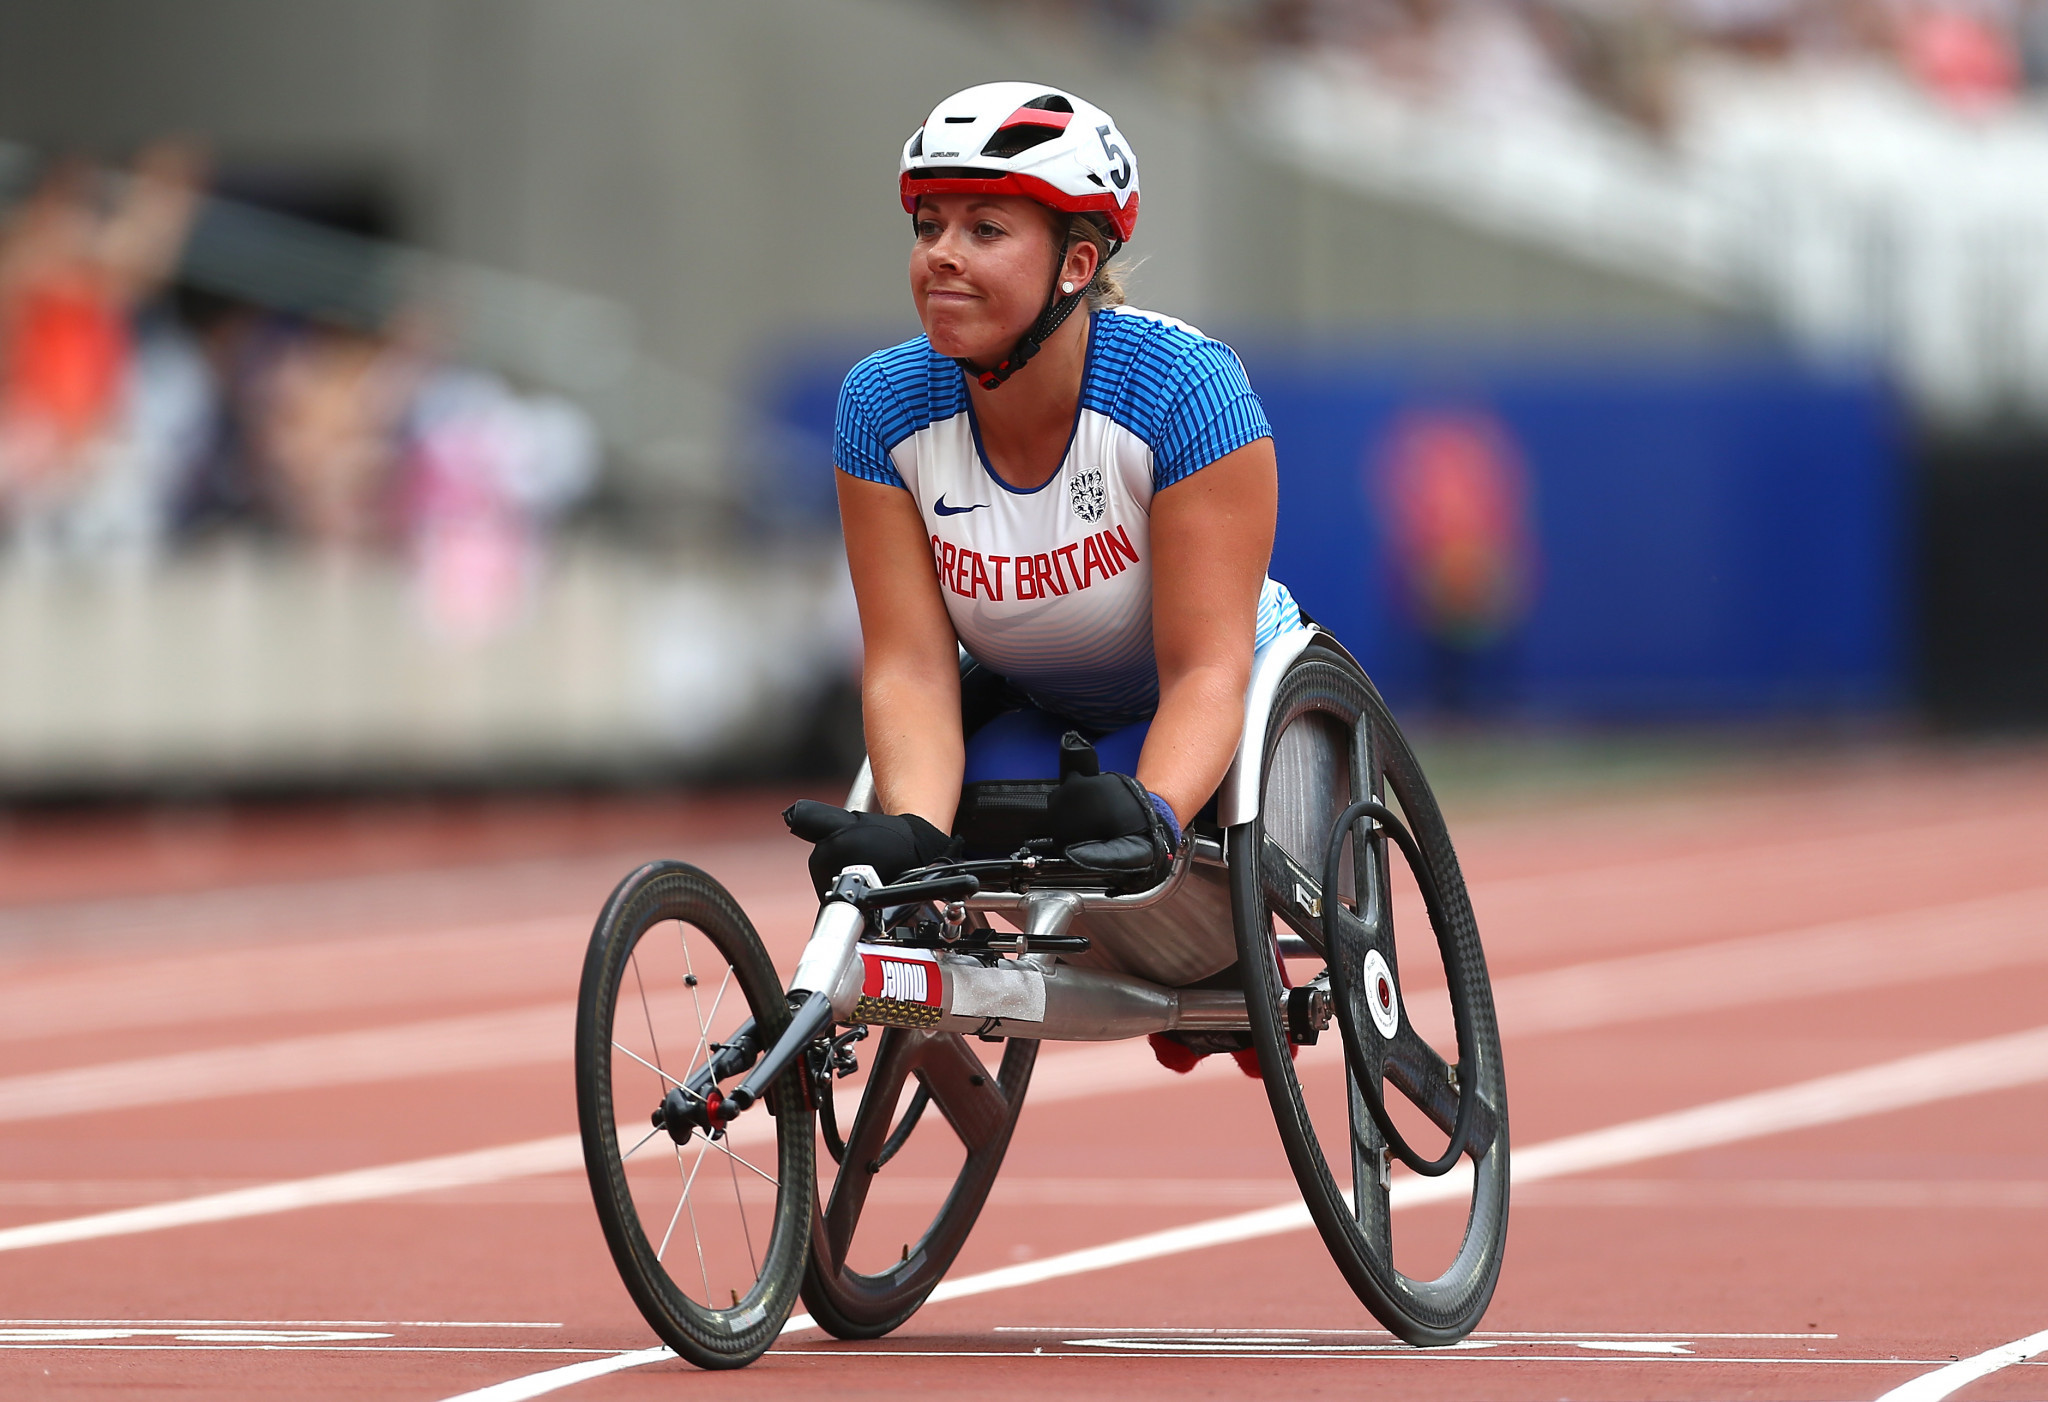 Britain names 11 defending champions in squad for 2019 World Para Athletics Championships